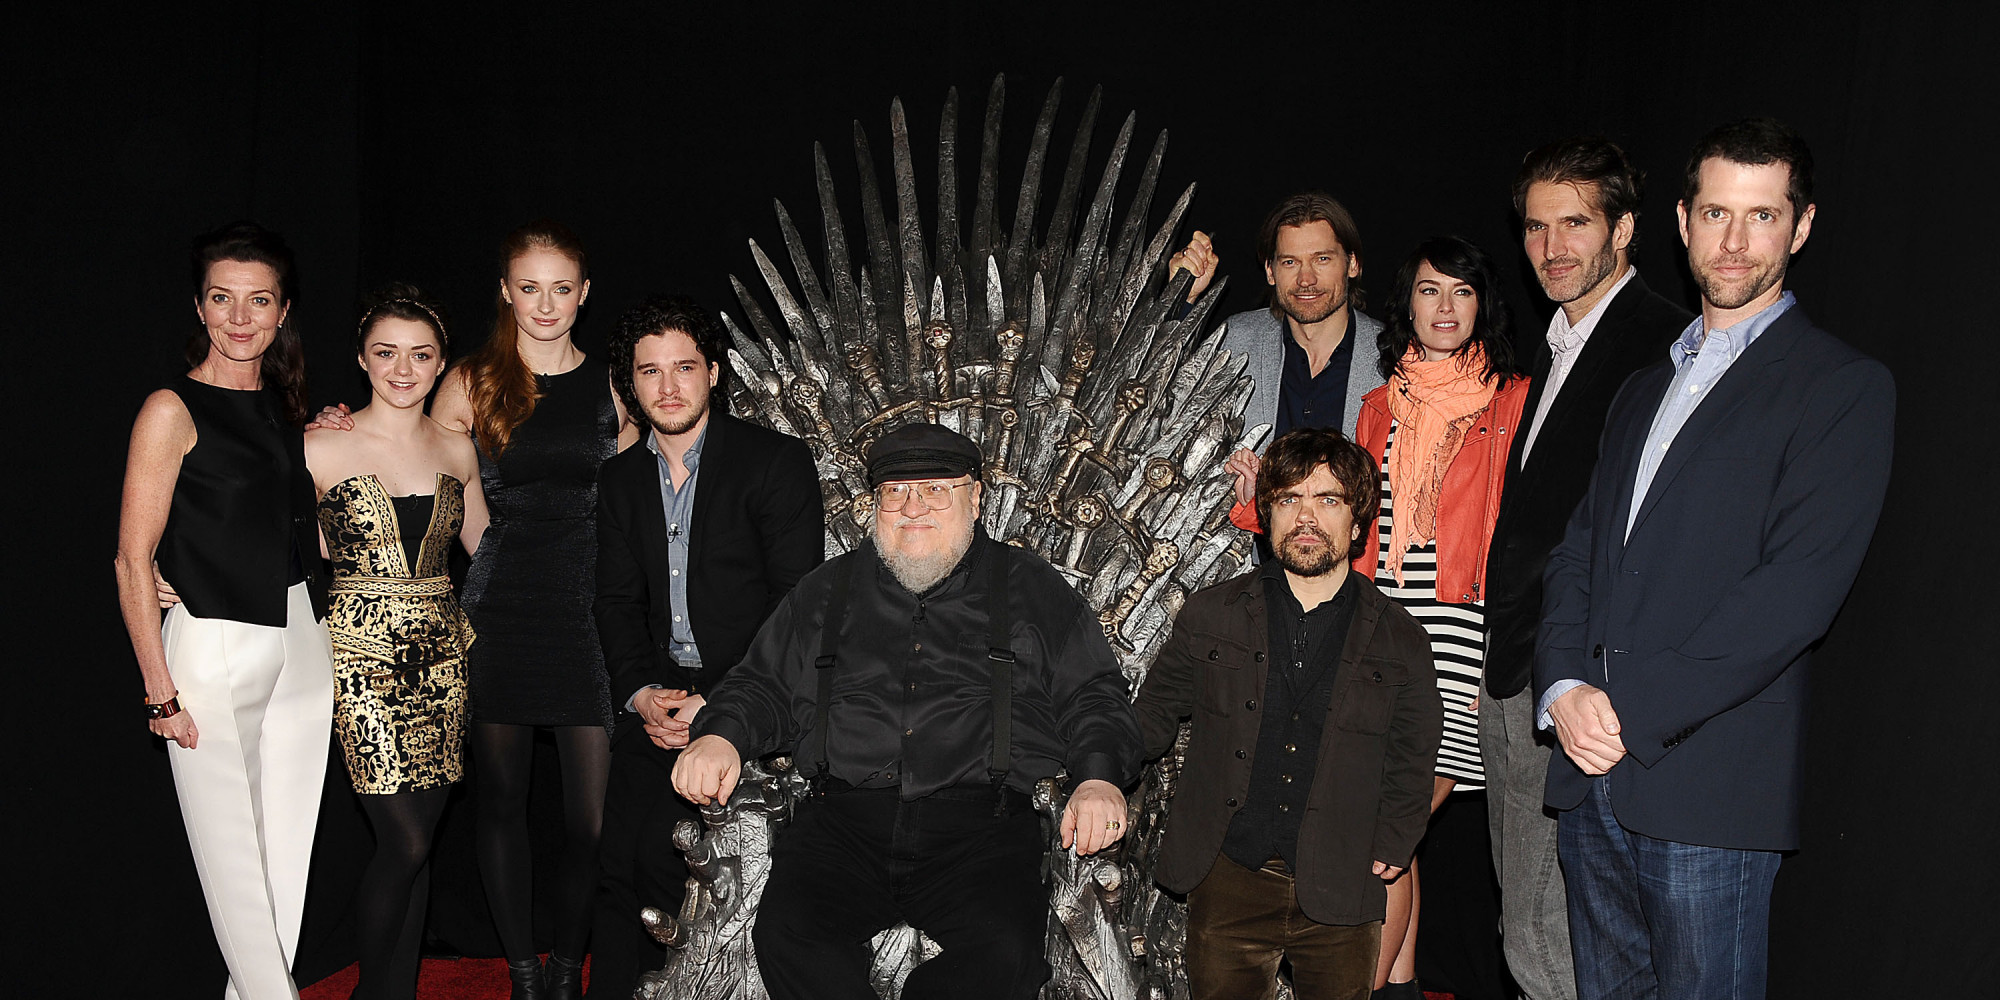 Cast of Game of Thrones